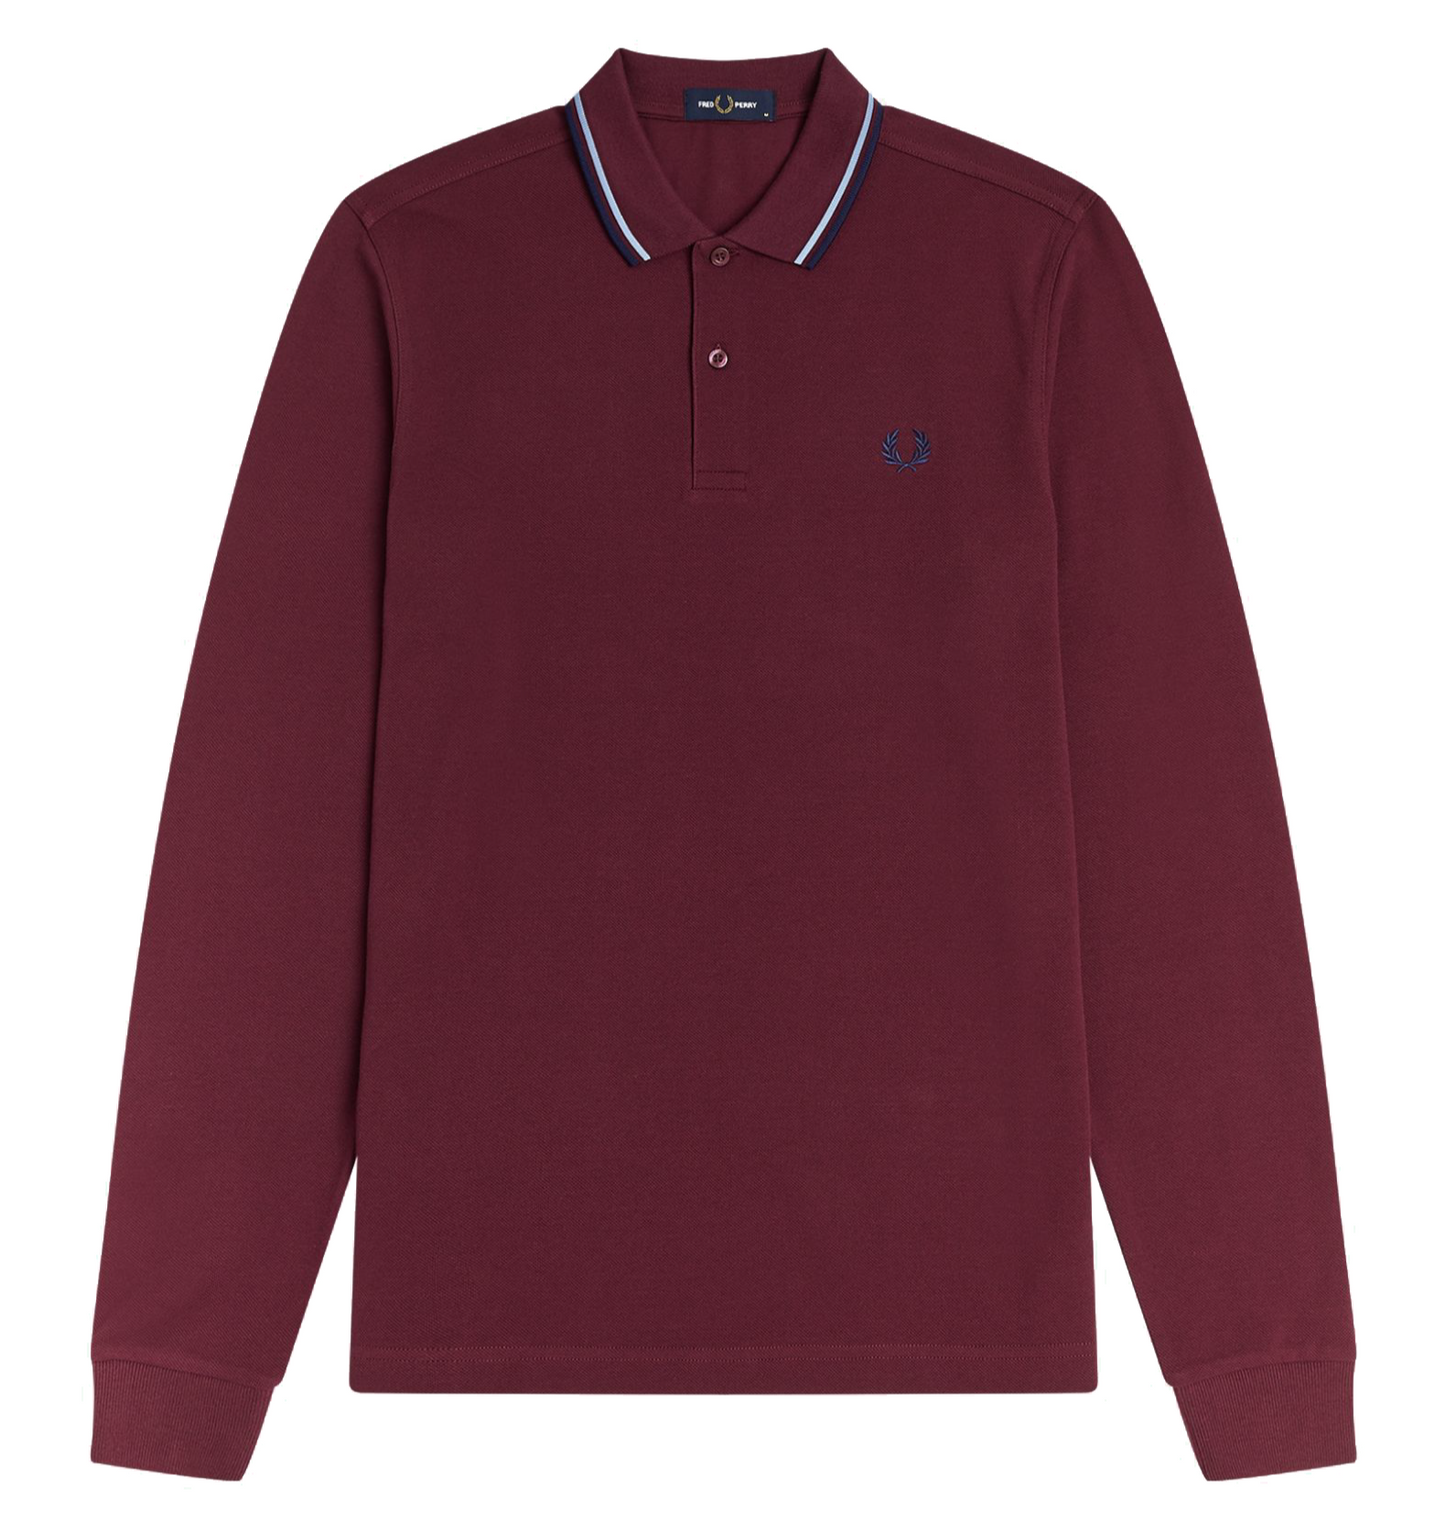 Fred Perry LS Twin Tipped Shirt